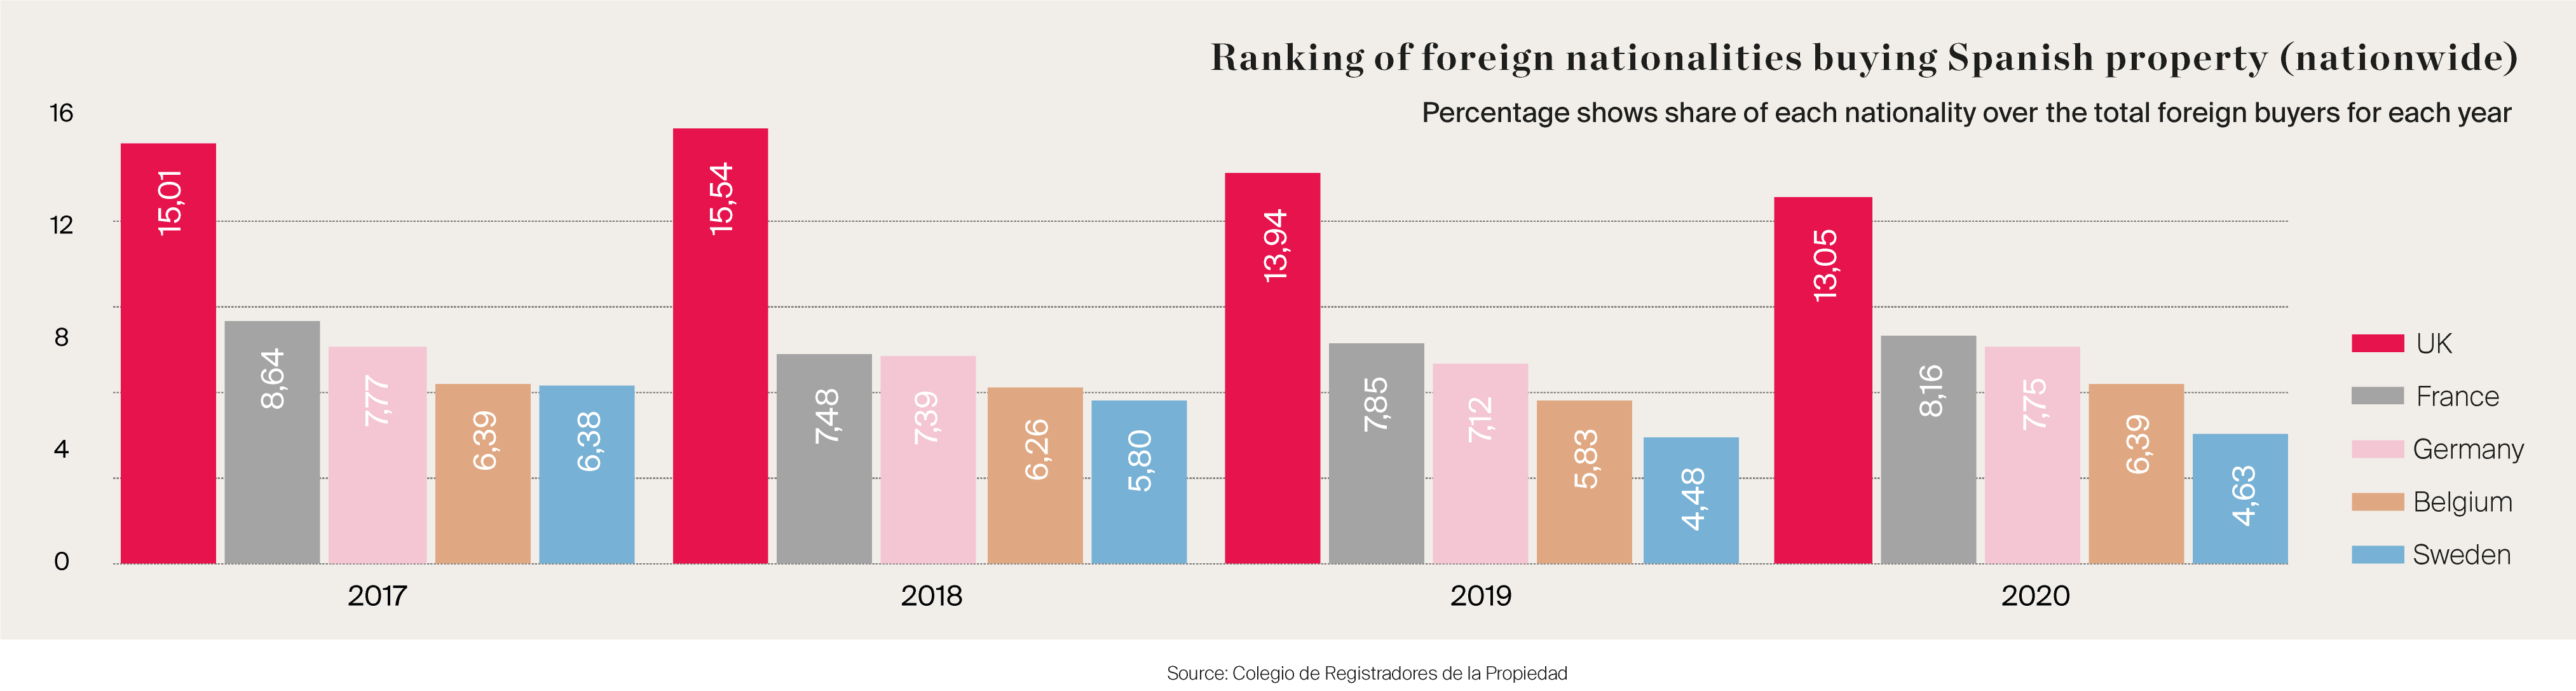 Ranking of foreign nationalities buying Spanish property